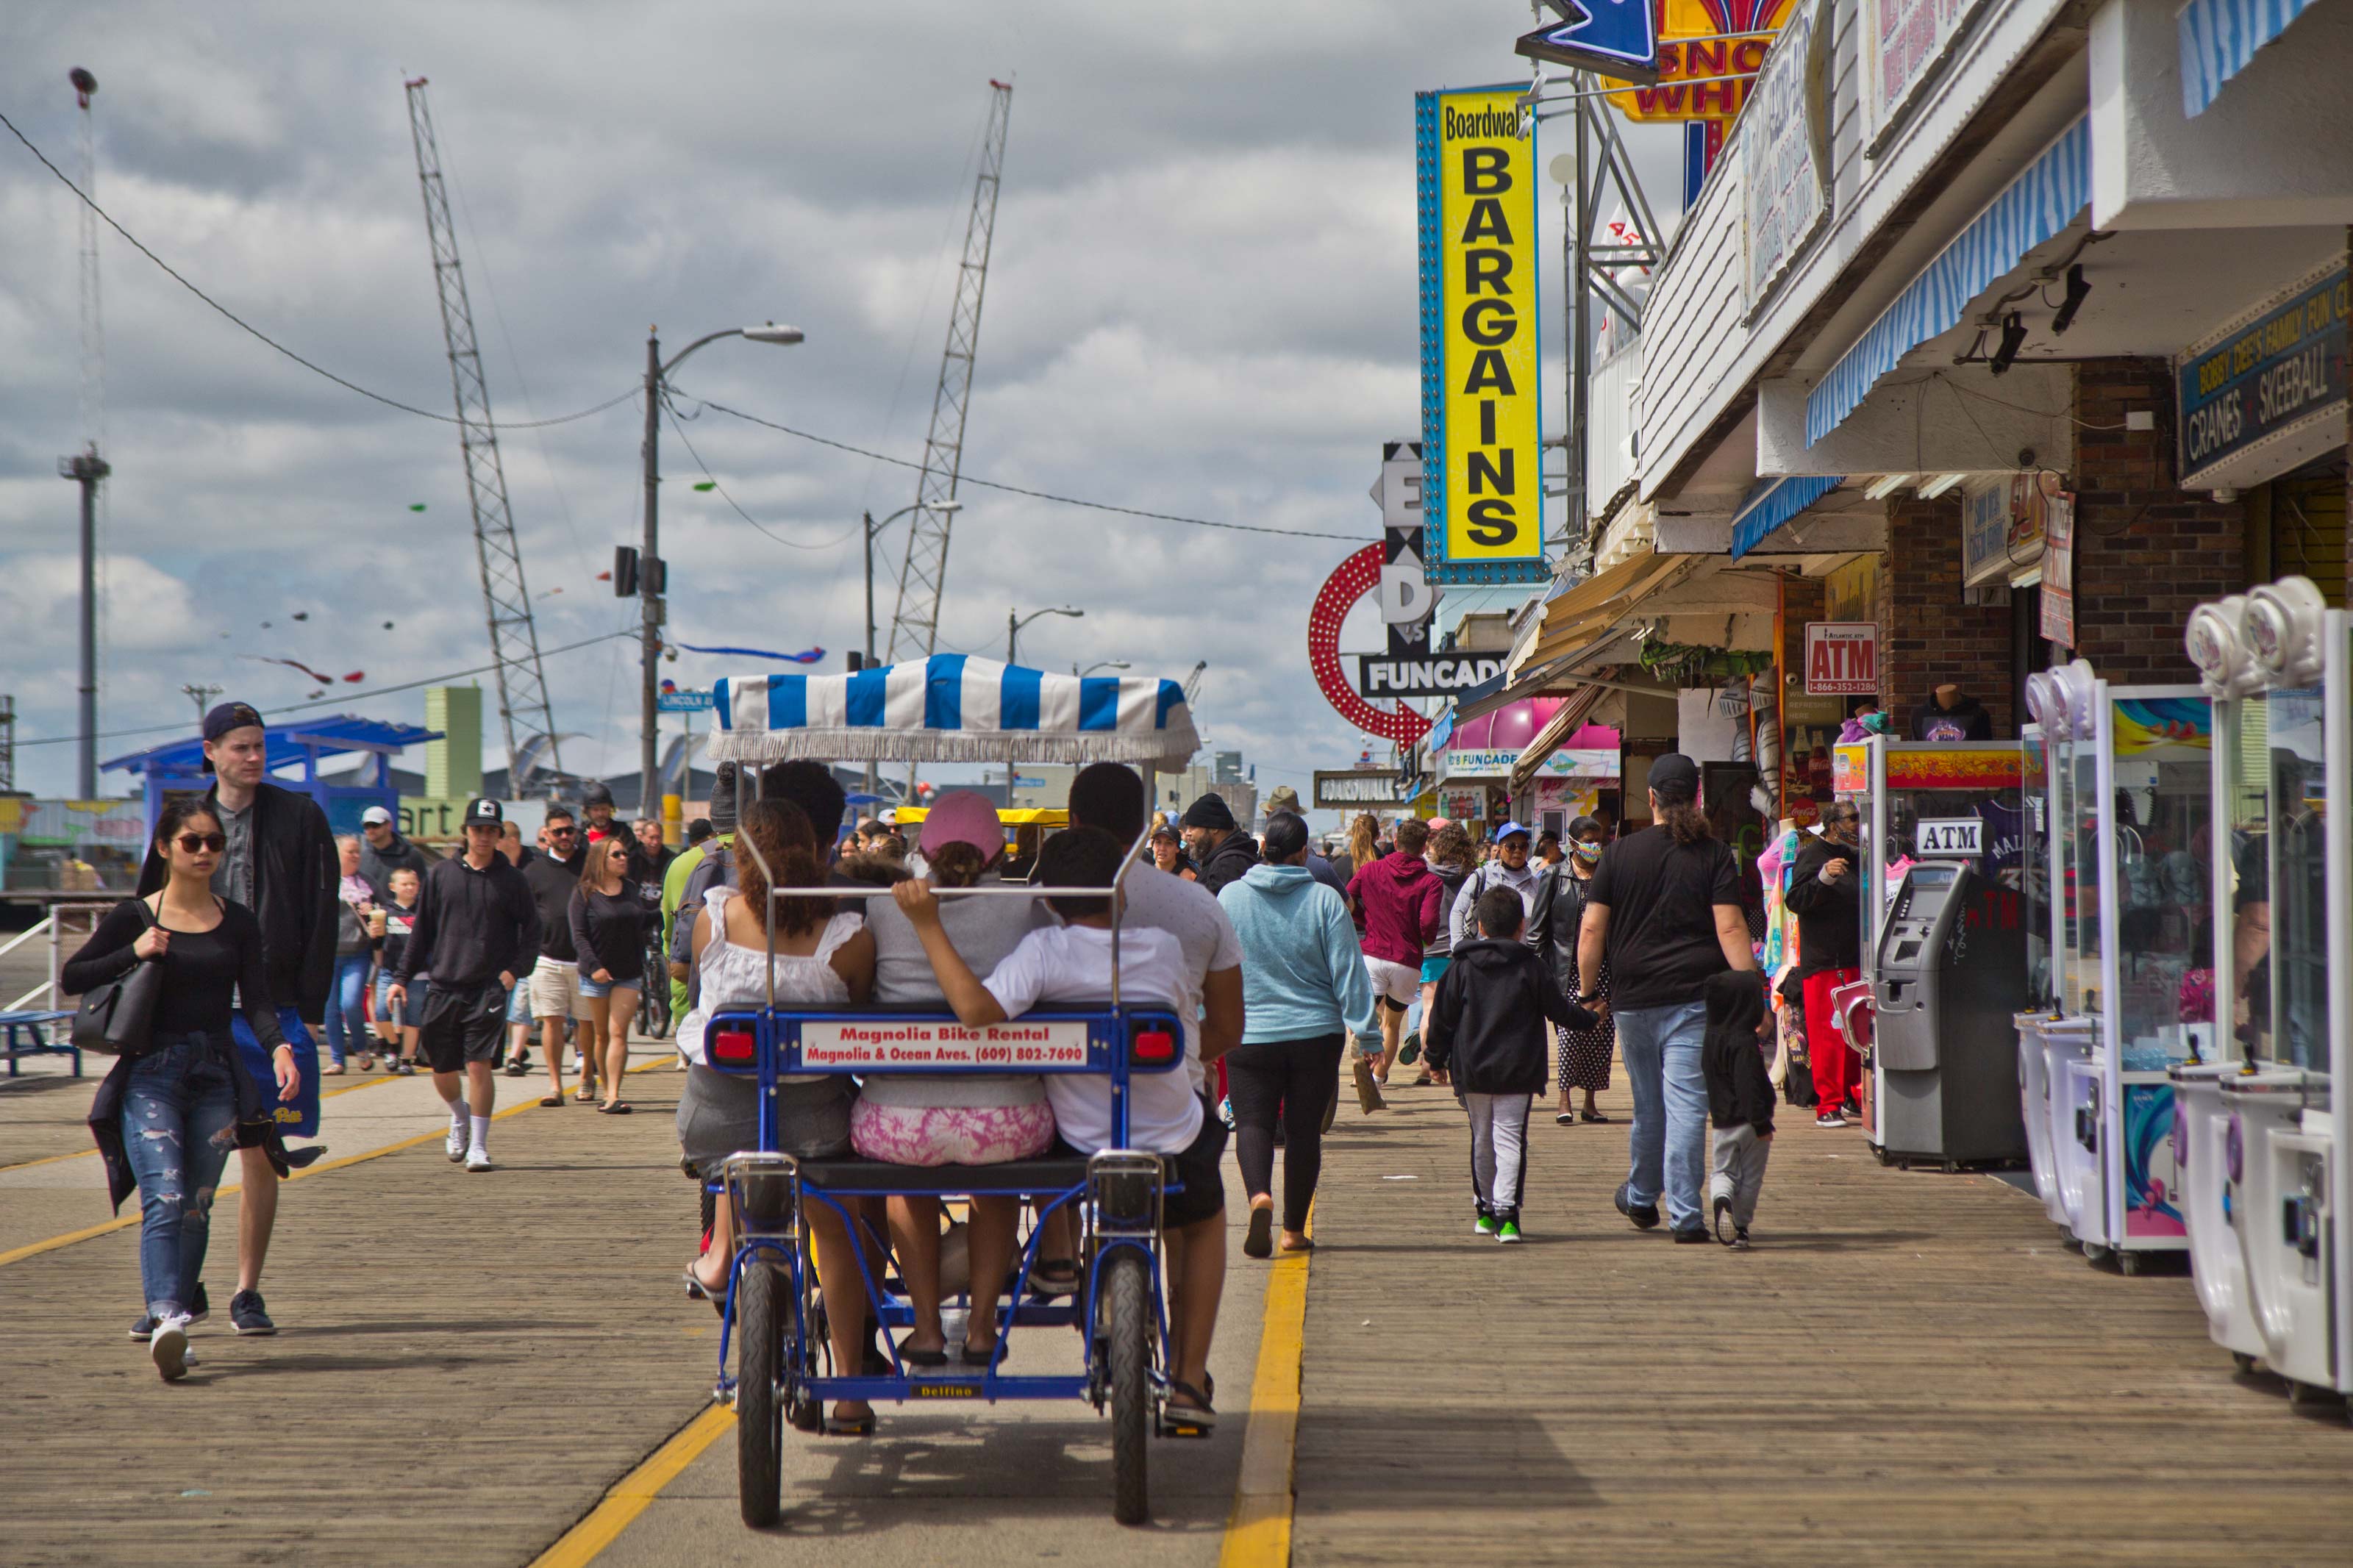 New Jersey police union calls for 'real consequences' for drunk, rowdy teens after boardwalk unrest